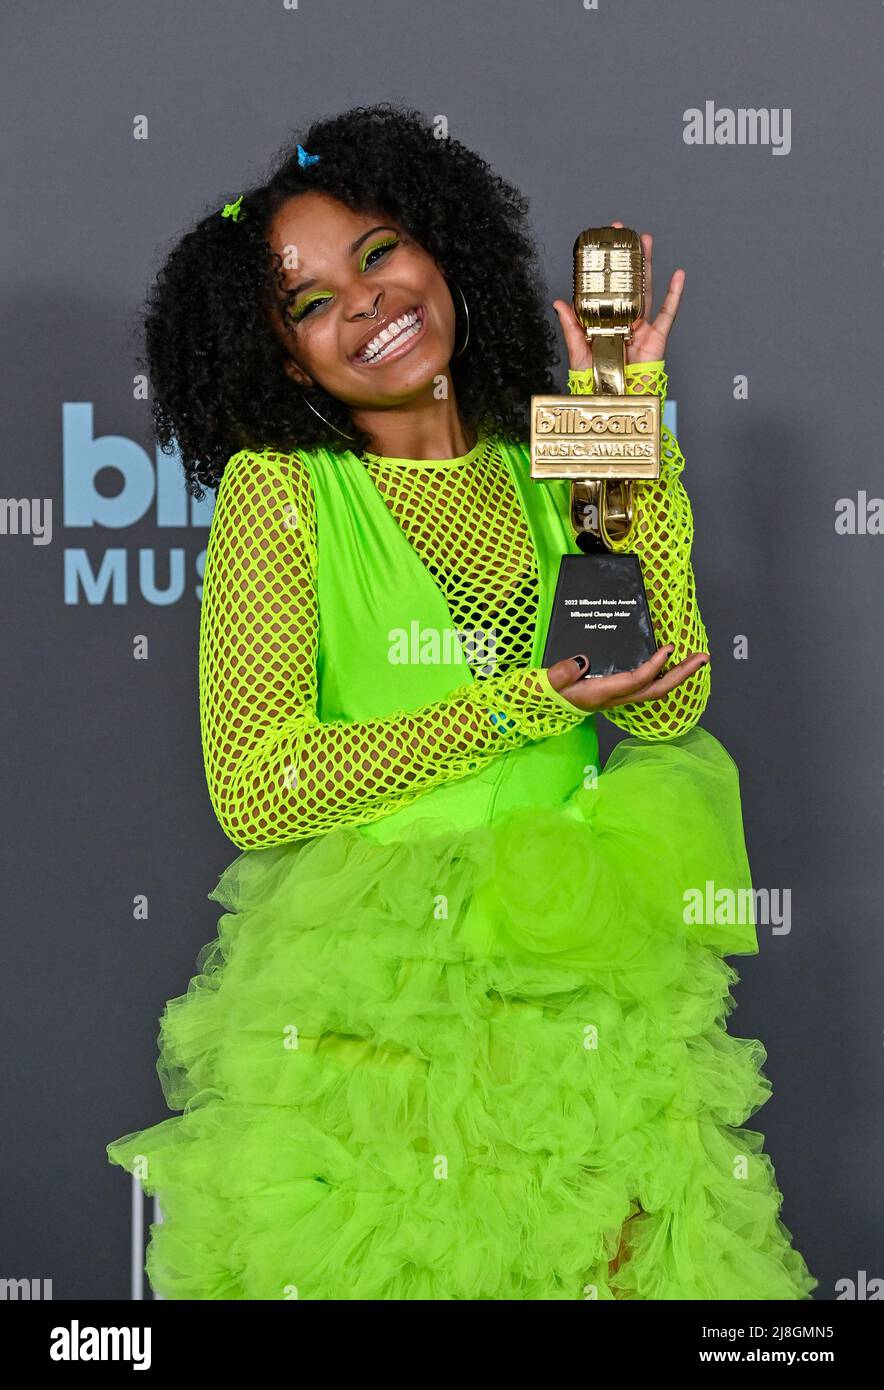 Las Vegas, United States. 16th May, 2022. Mari Copeny appears backstage with her award during the annual Billboard Music Awards held at the MGM Grand Garden Arena in Las Vegas on May 15, 2022. Mari Copeny was honored with the Change Maker Award. Photo by Jim Ruymen/UPI Credit: UPI/Alamy Live News Stock Photo